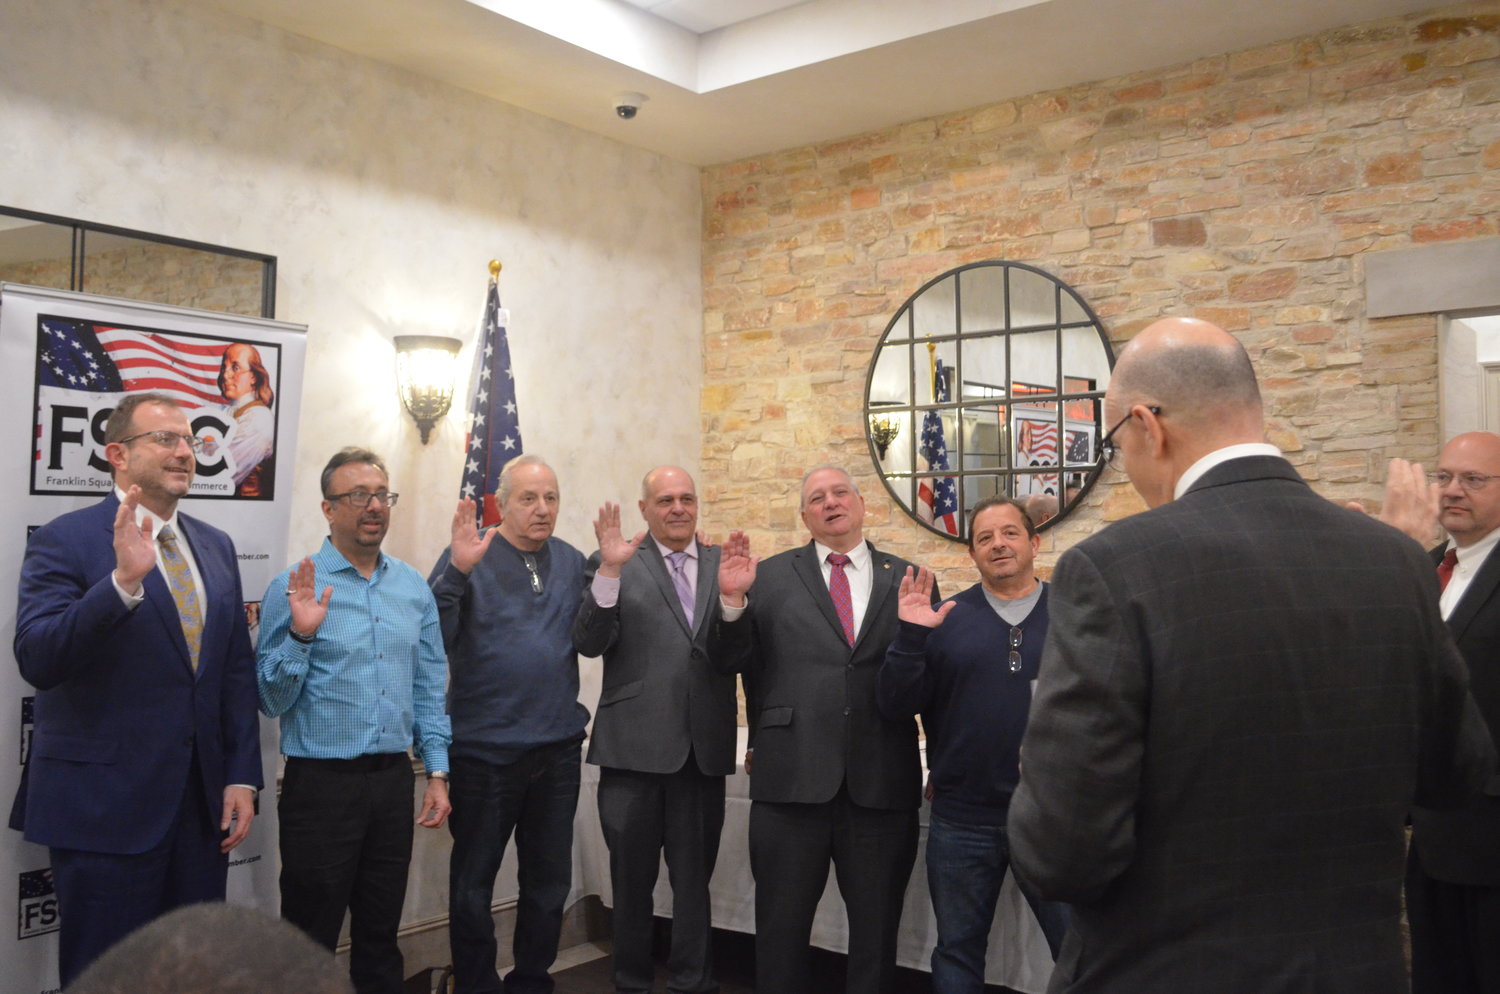 Guiffré administered the oath of office to the 10 business owners who make up the chamber’s board of directors.